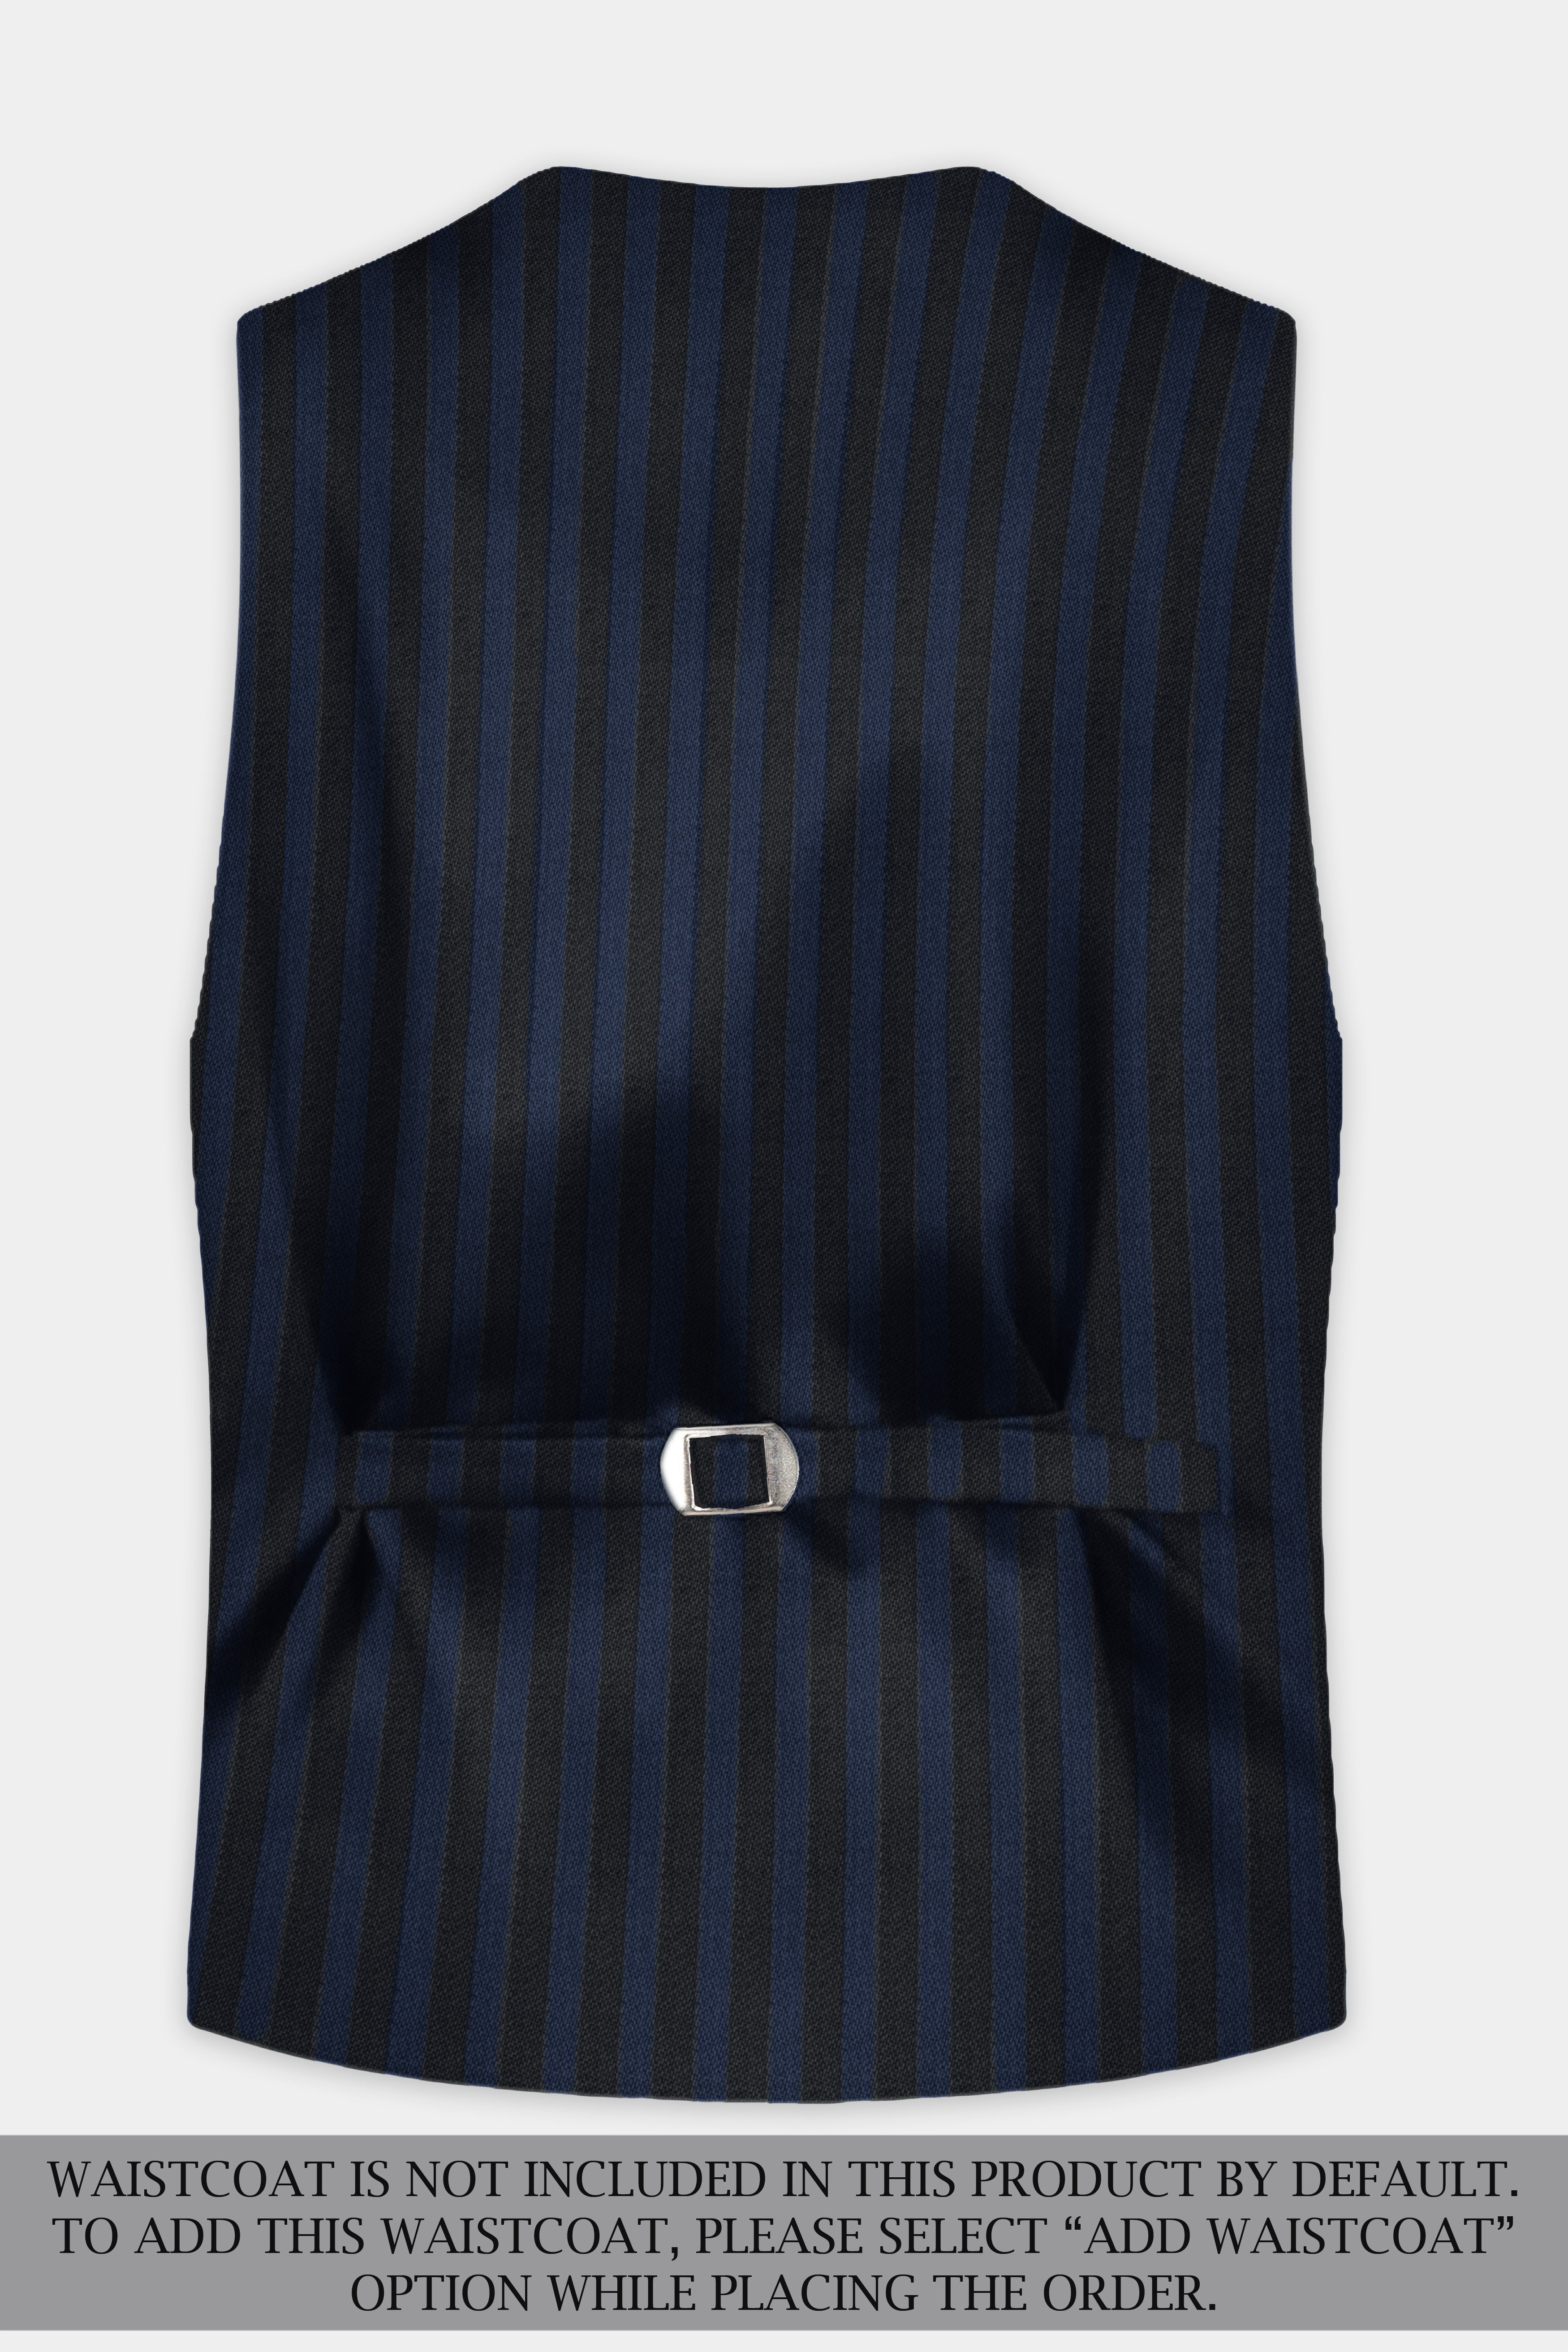 Mirage Blue and Black Striped Wool Blend Suit